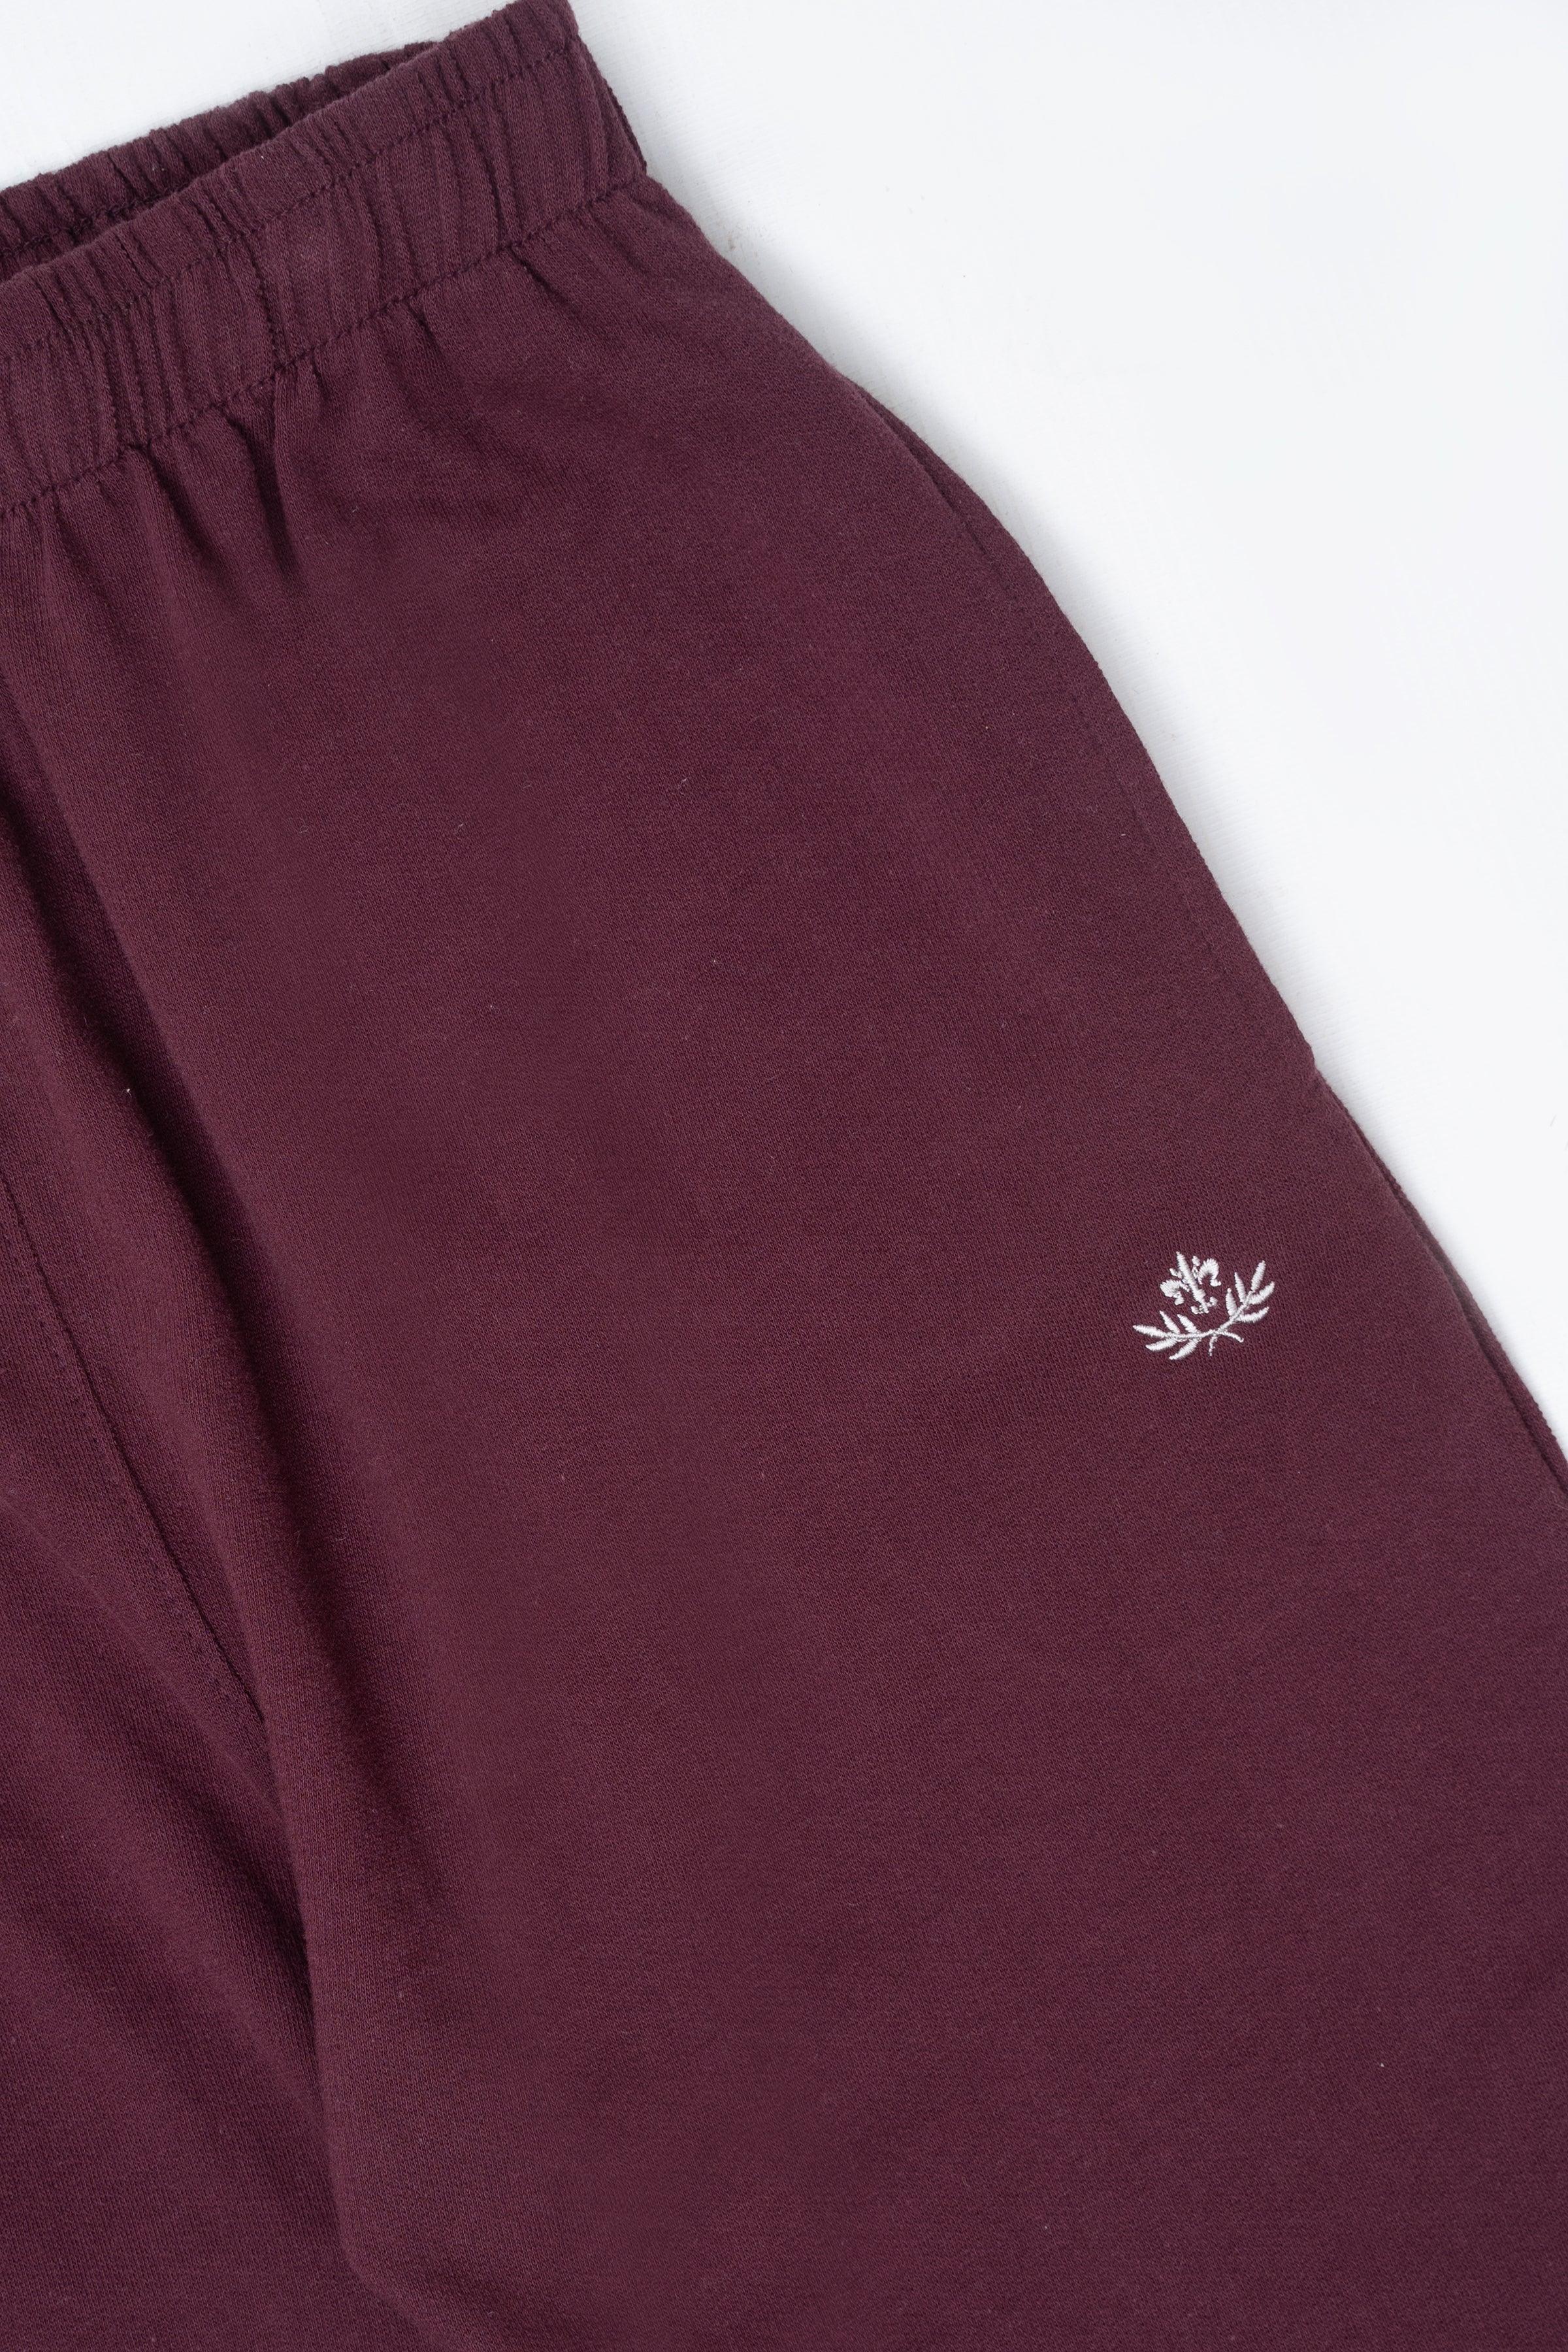 SLEEPWEAR TROUSER MAROON at Charcoal Clothing